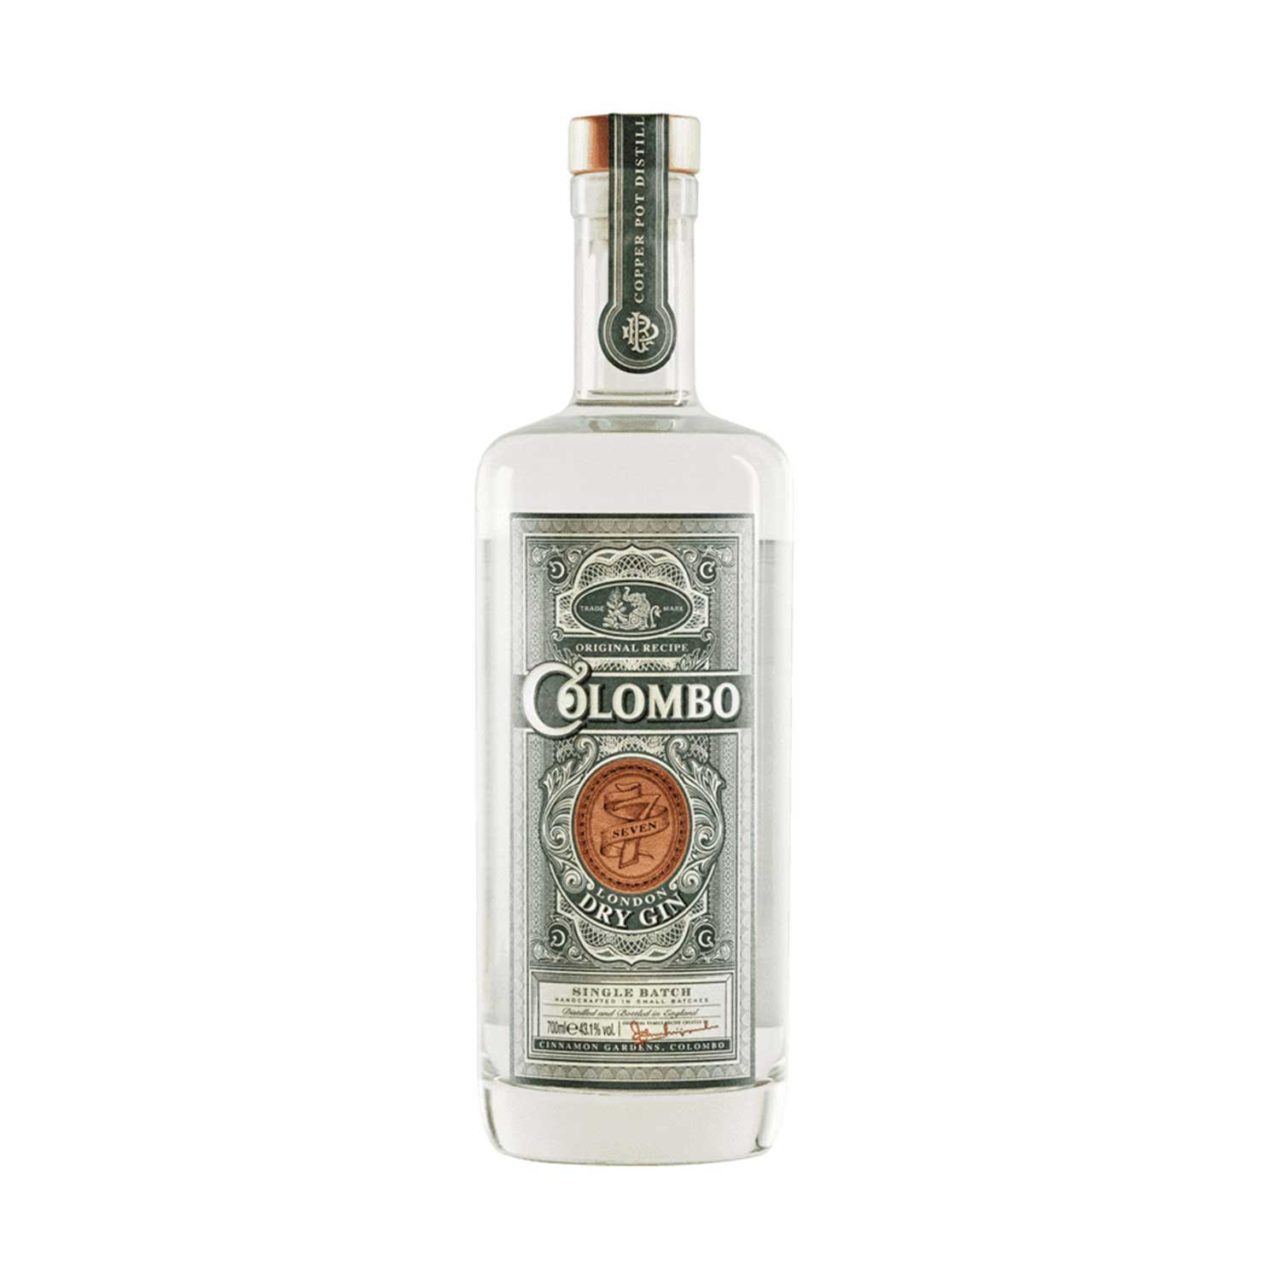 COLOMBO-gin-old-tom-gin-paris